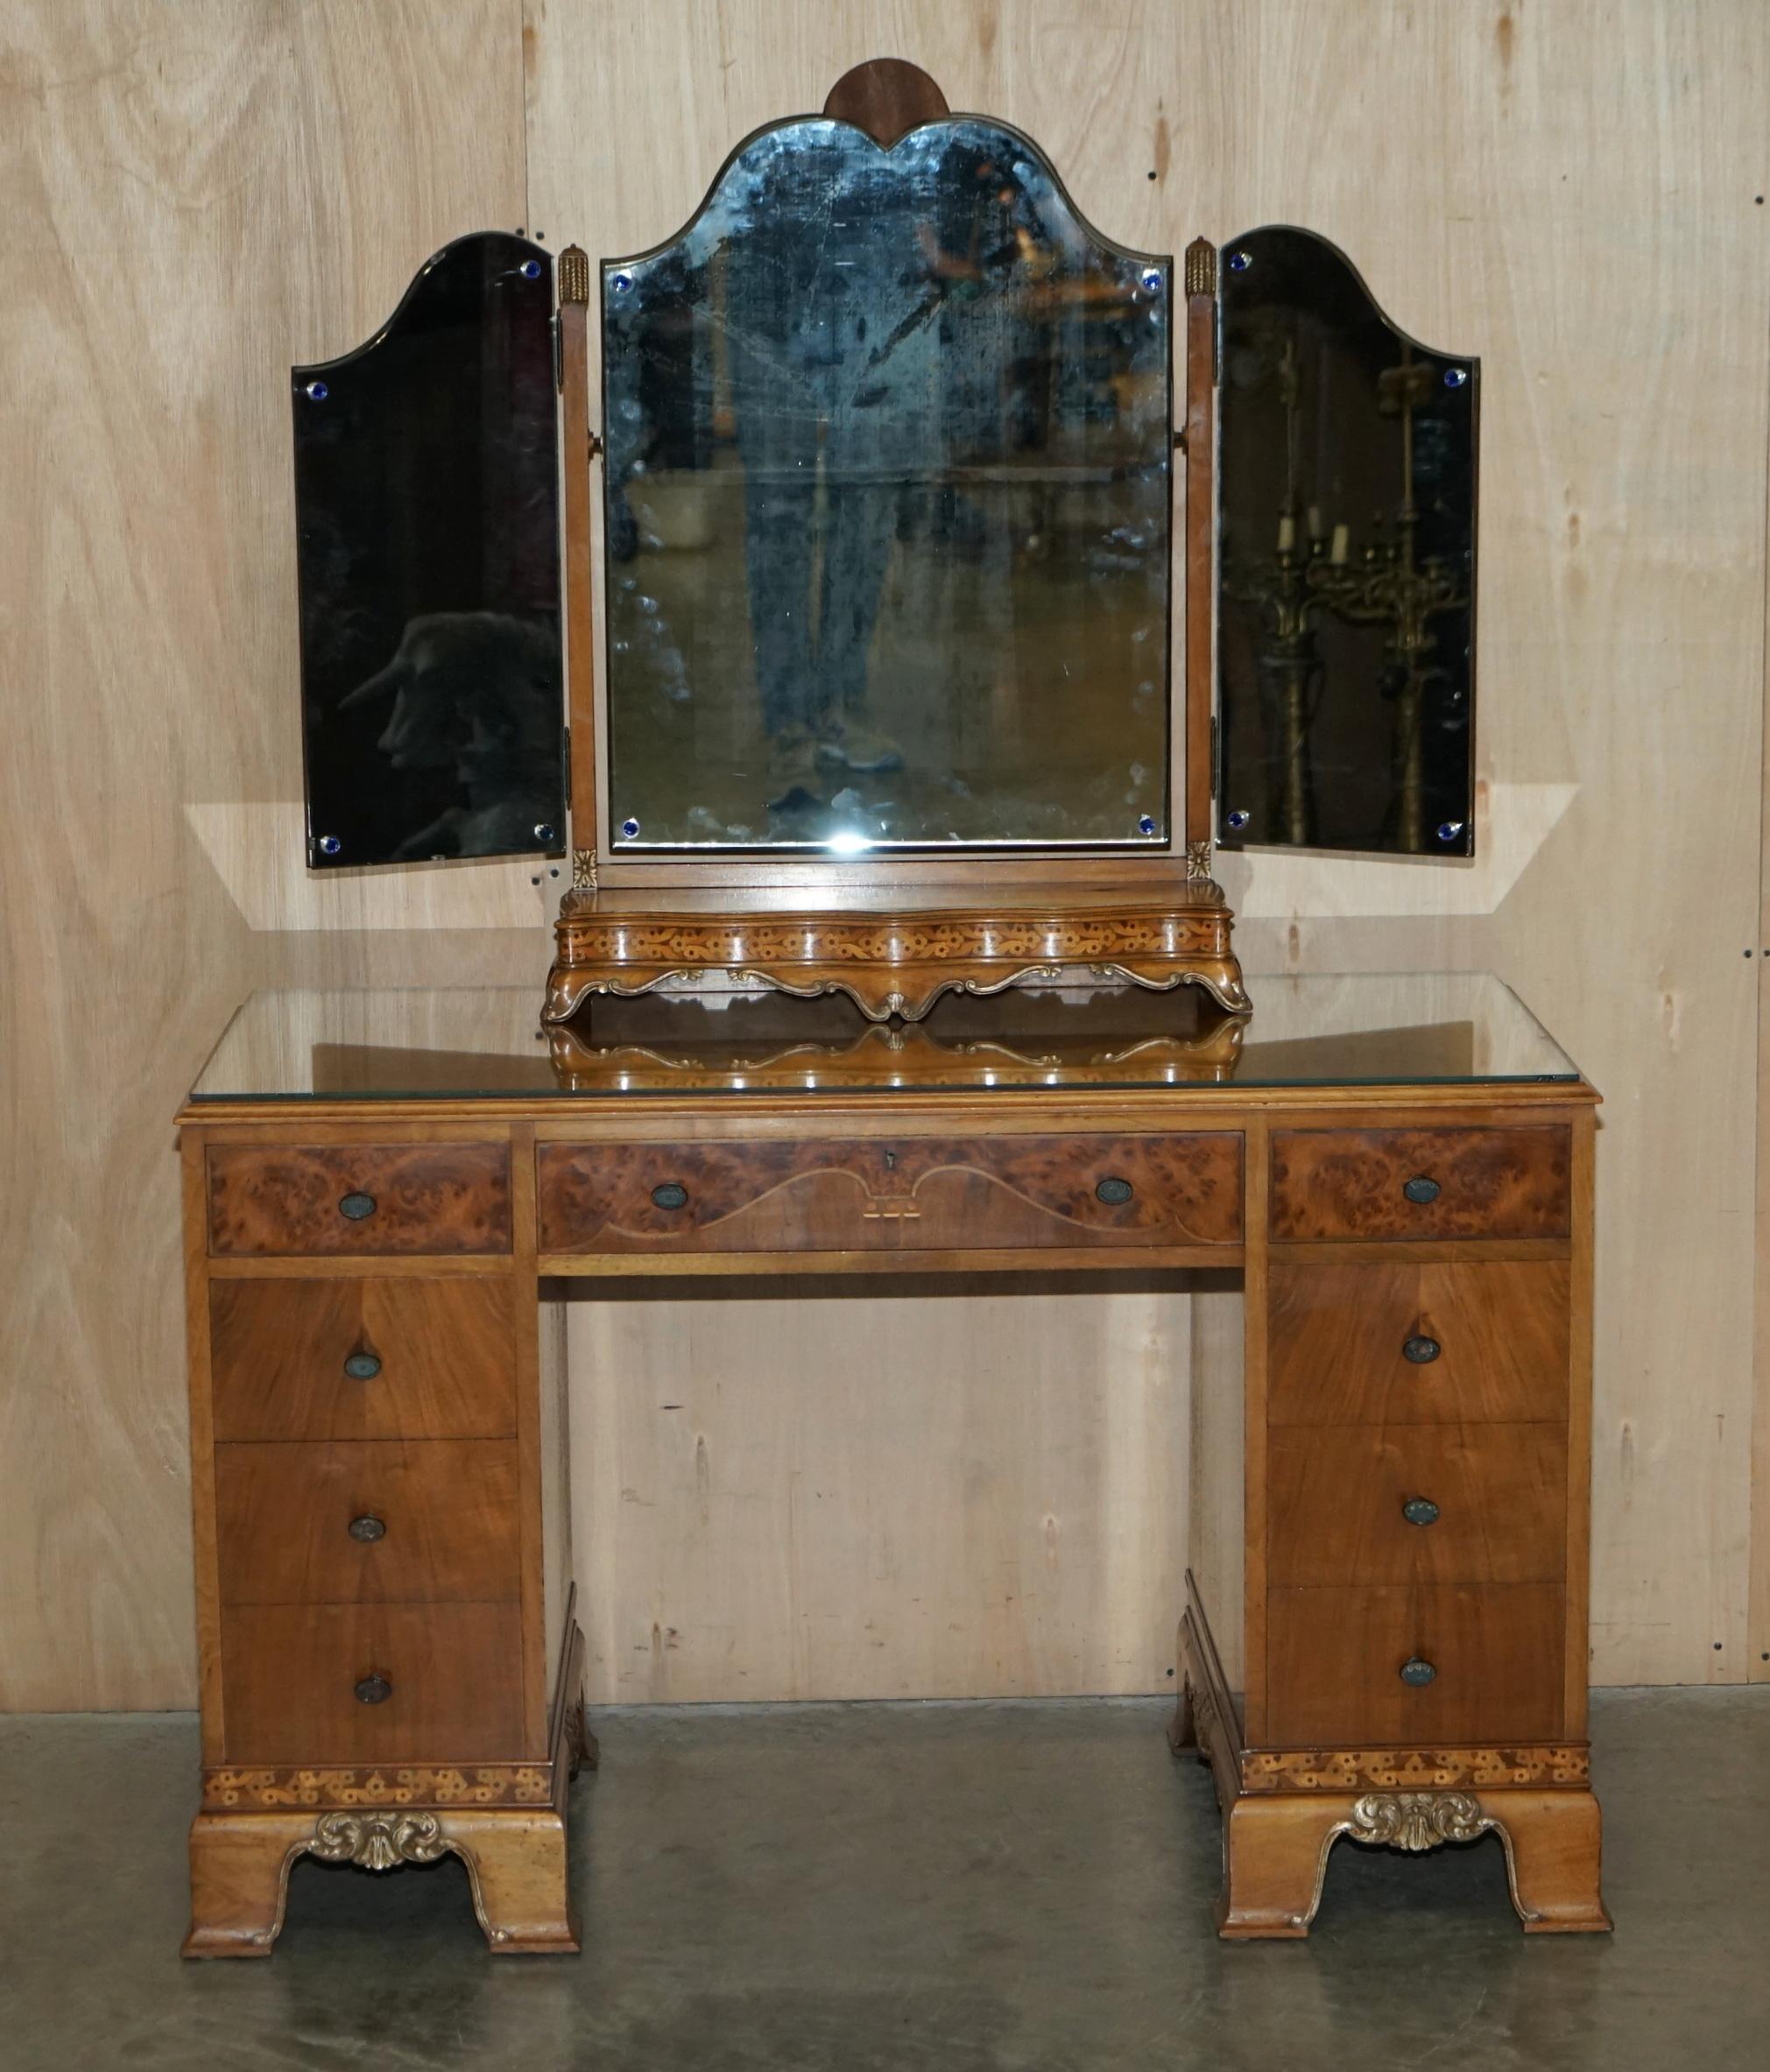 We are delighted to offer for sale this finest quality Waring & Gillow Lancaster, Burr Walnut inlaid Dressing table with tri folding mirrors which is part of a suite

This piece is part of a bedroom set, I have in total a triple bank wardrobe,